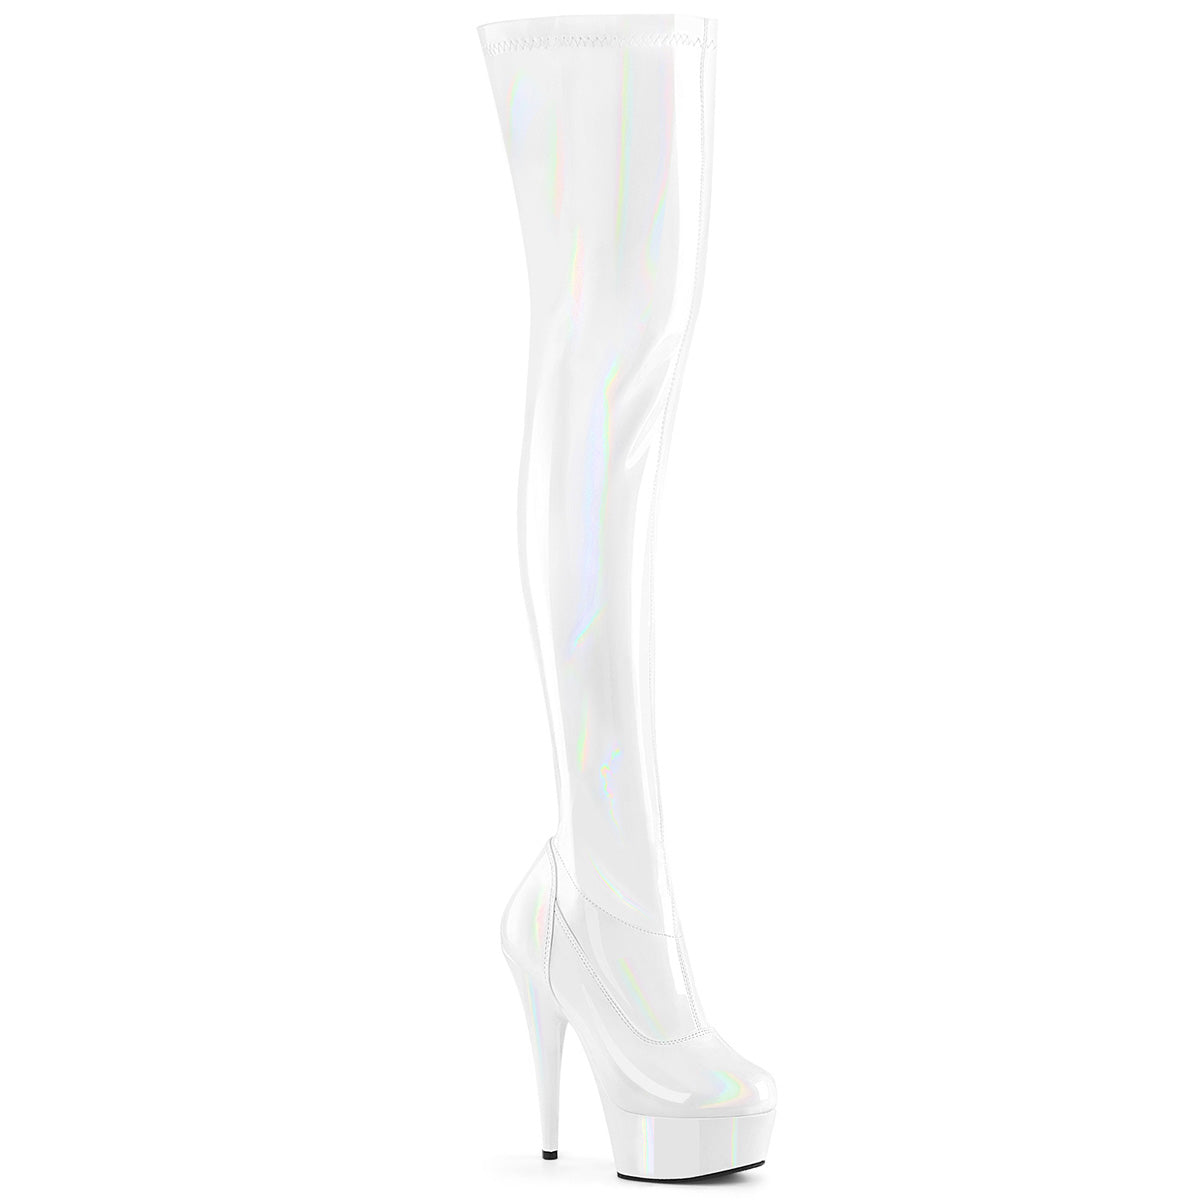 DELIGHT-3000HWR Thigh High Boots White Multi view 1